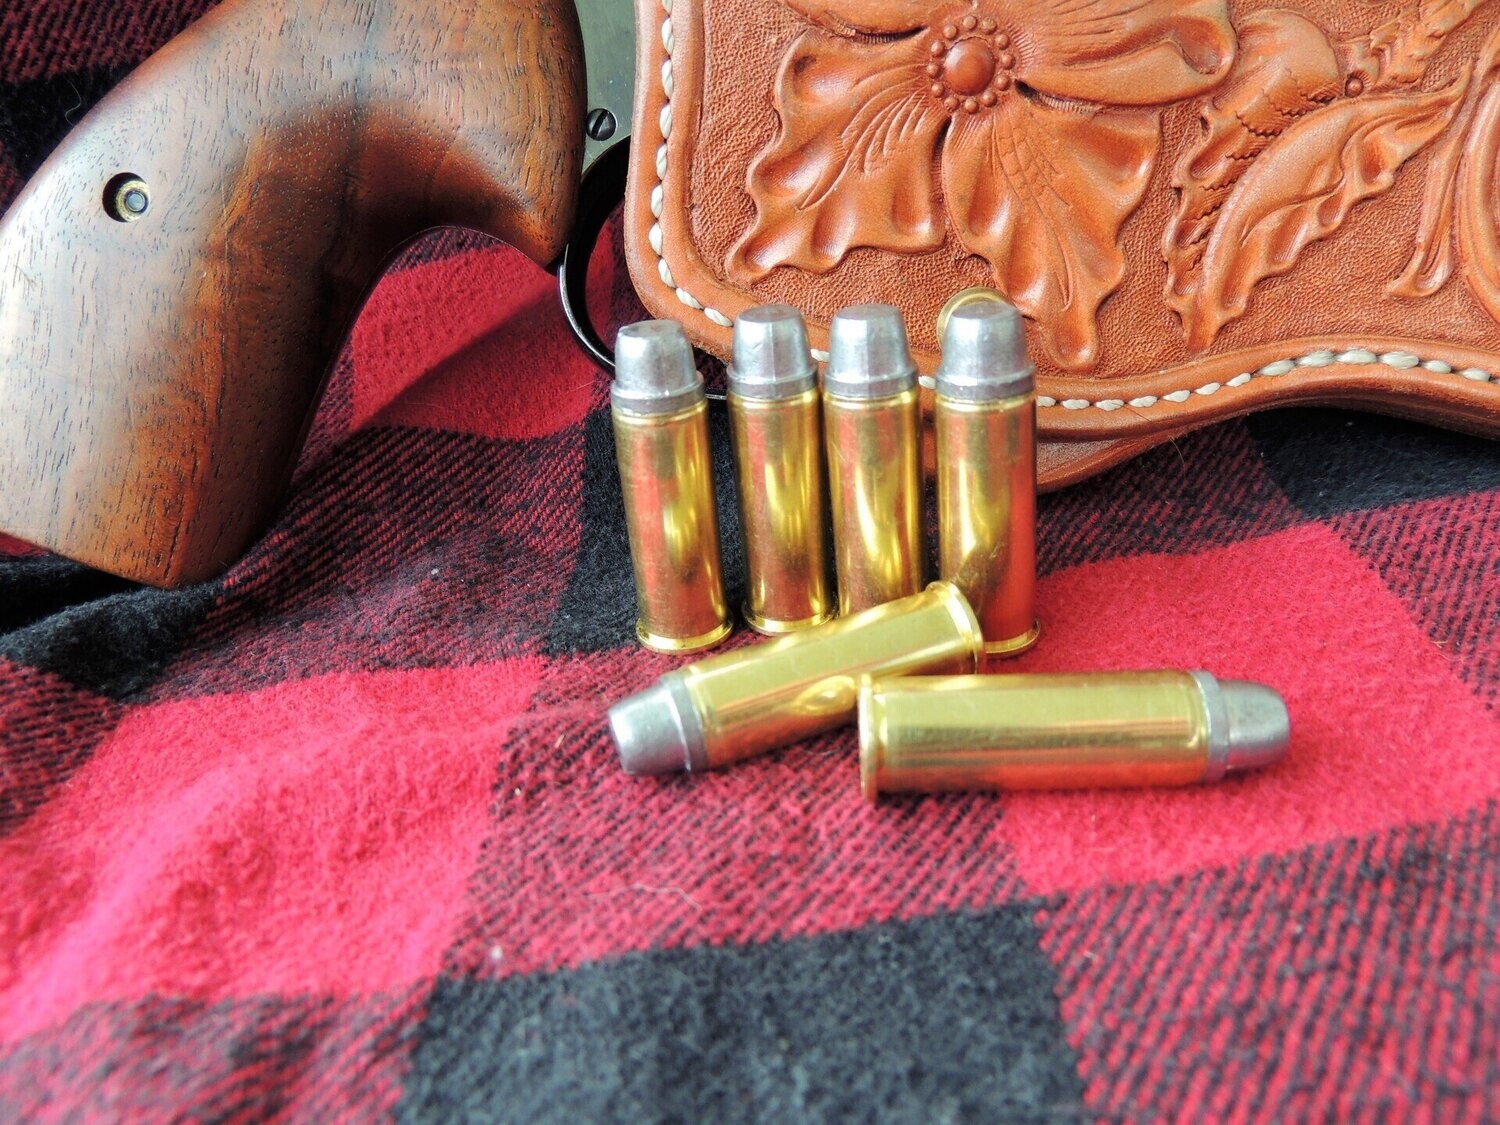 .44 Magnum "THE Load" 240 grain Keith Style lead Semi Wadcutter at 1,200 FPS. (100 RND)